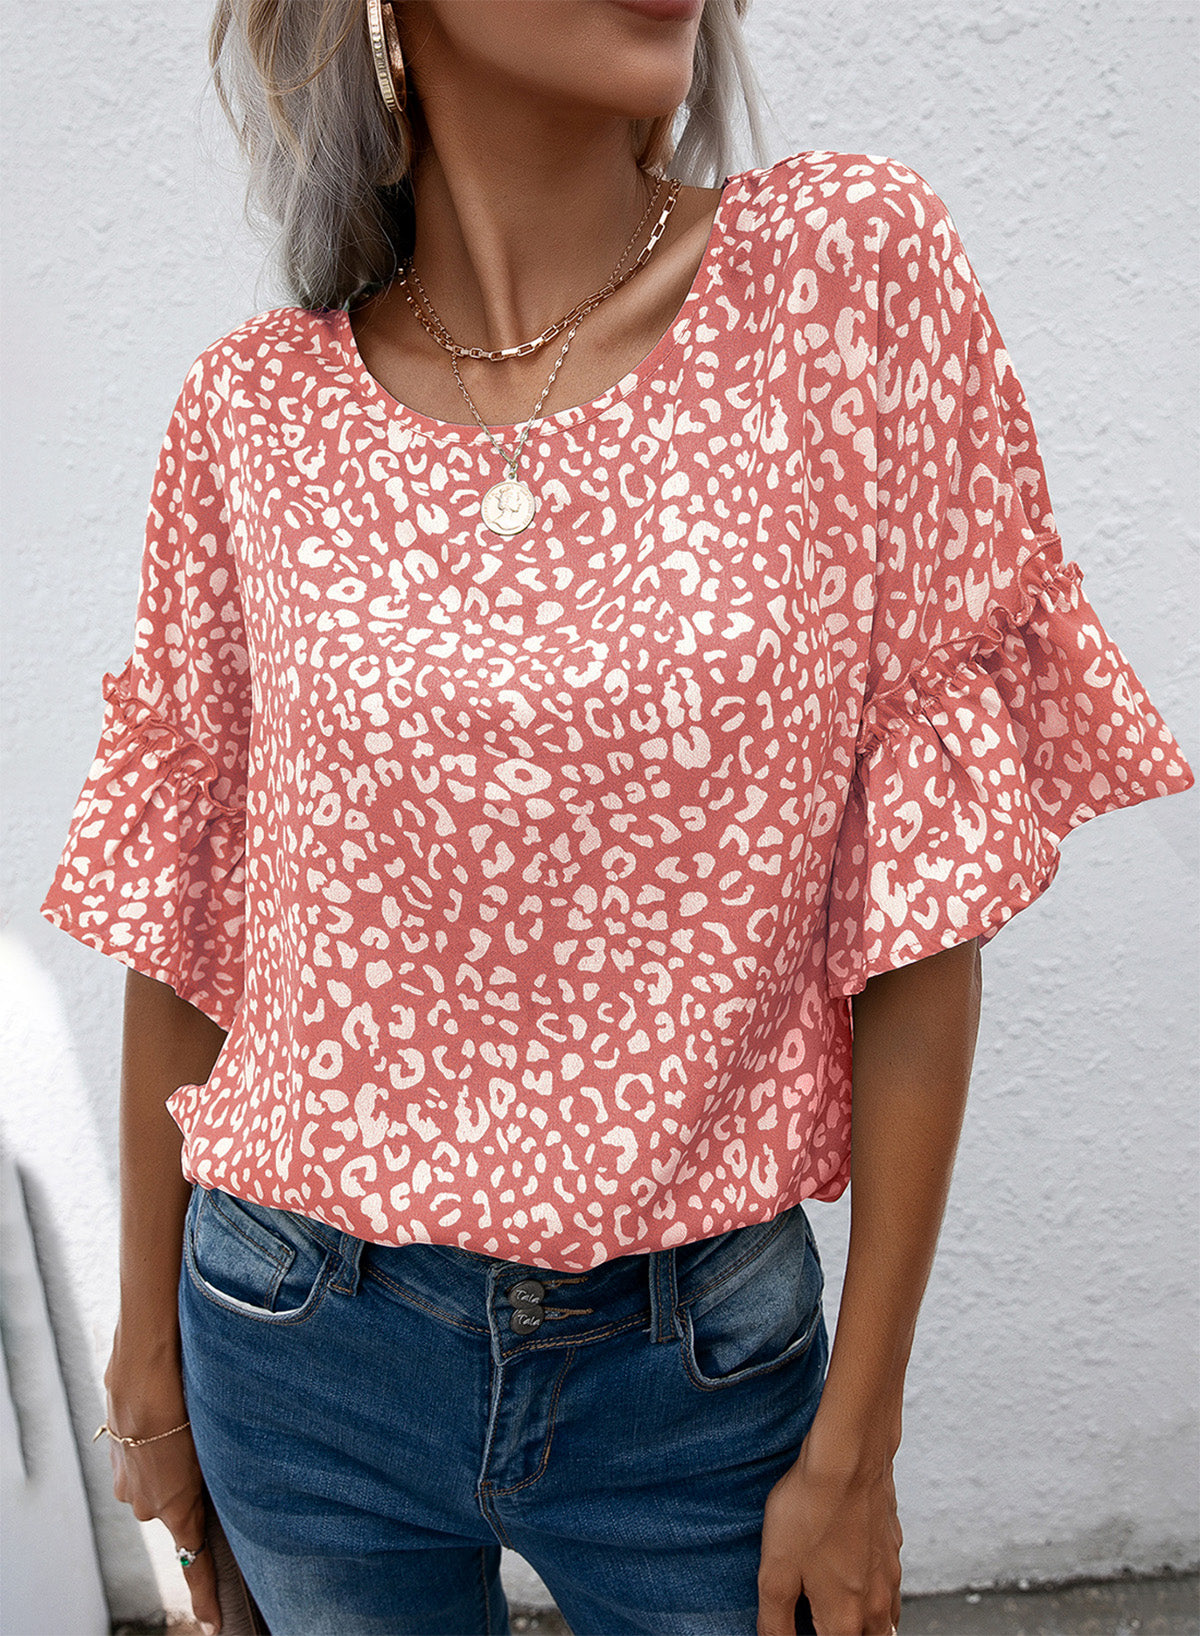 Leopard Round Neck Frill Trim Blouse - Online Only